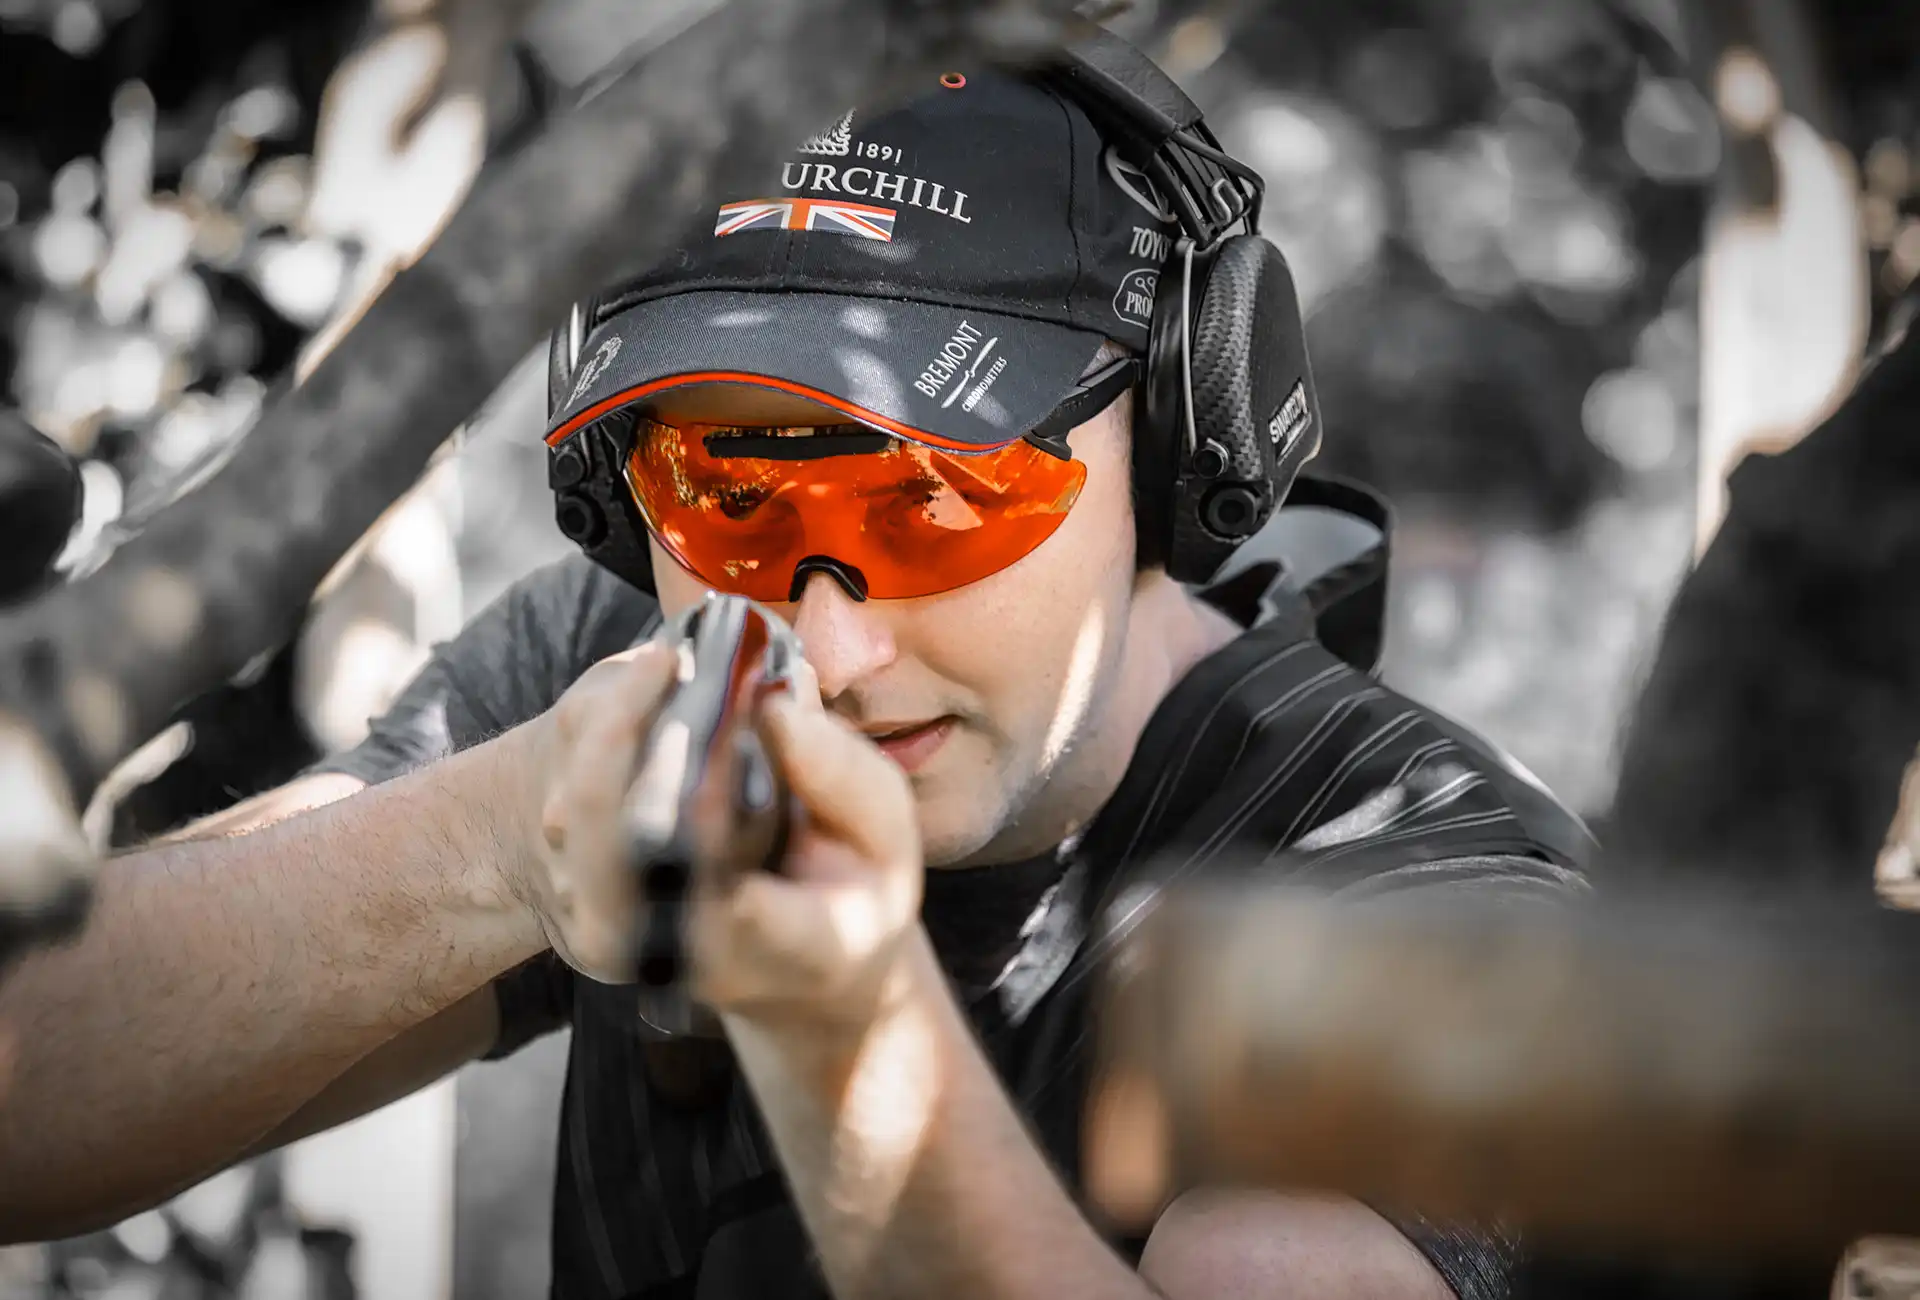 A male clay shooter, wearing ear protection and X Sight Sport shooting glasses with a vibrant orange lens, gazes down the barrel of his shotgun aimed towards the camera. The bold orange lens serves as the focal point of the image, enhancing contrast and visibility. The backdrop of trees creates a dynamic sporting atmosphere, reflecting the challenging nature of the sport. This captivating shot captures the intensity and determination of the shooter, ready to take on the clay shooting discipline.